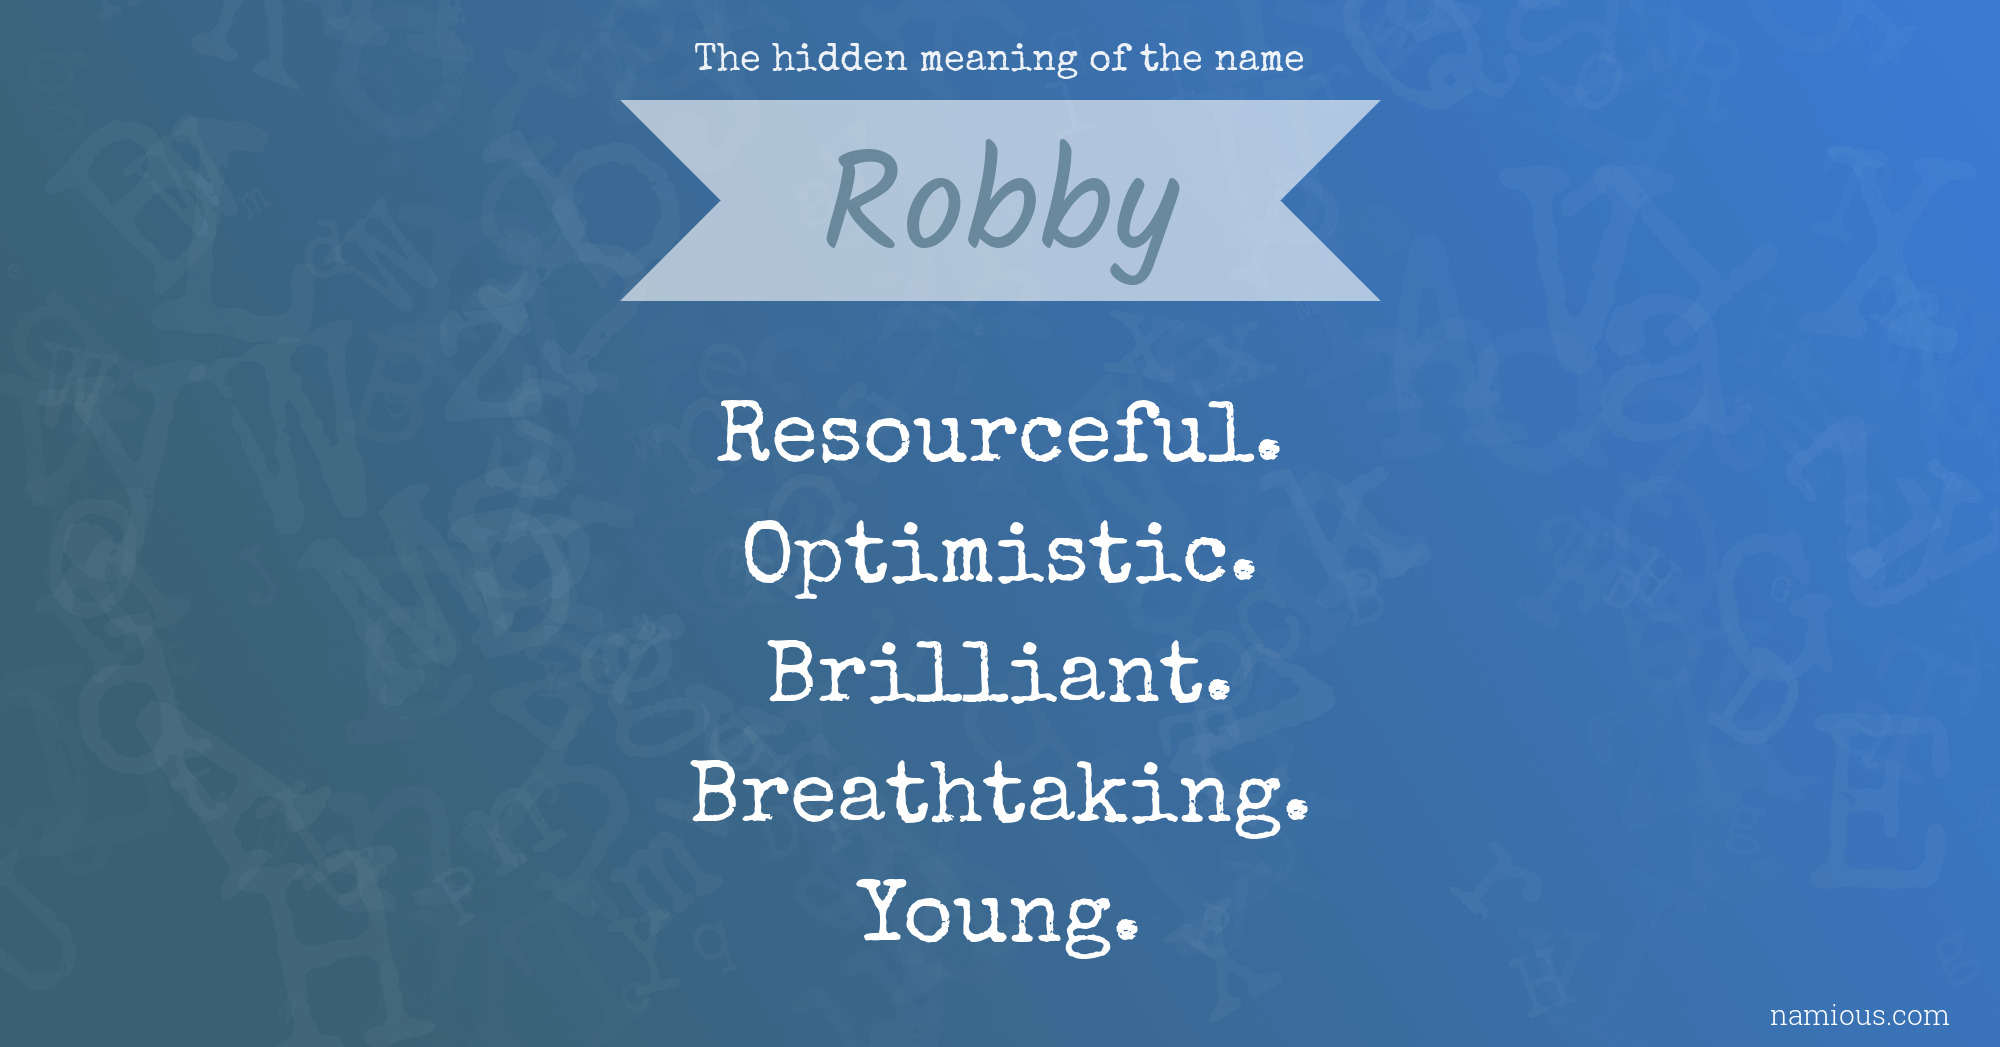 The hidden meaning of the name Robby